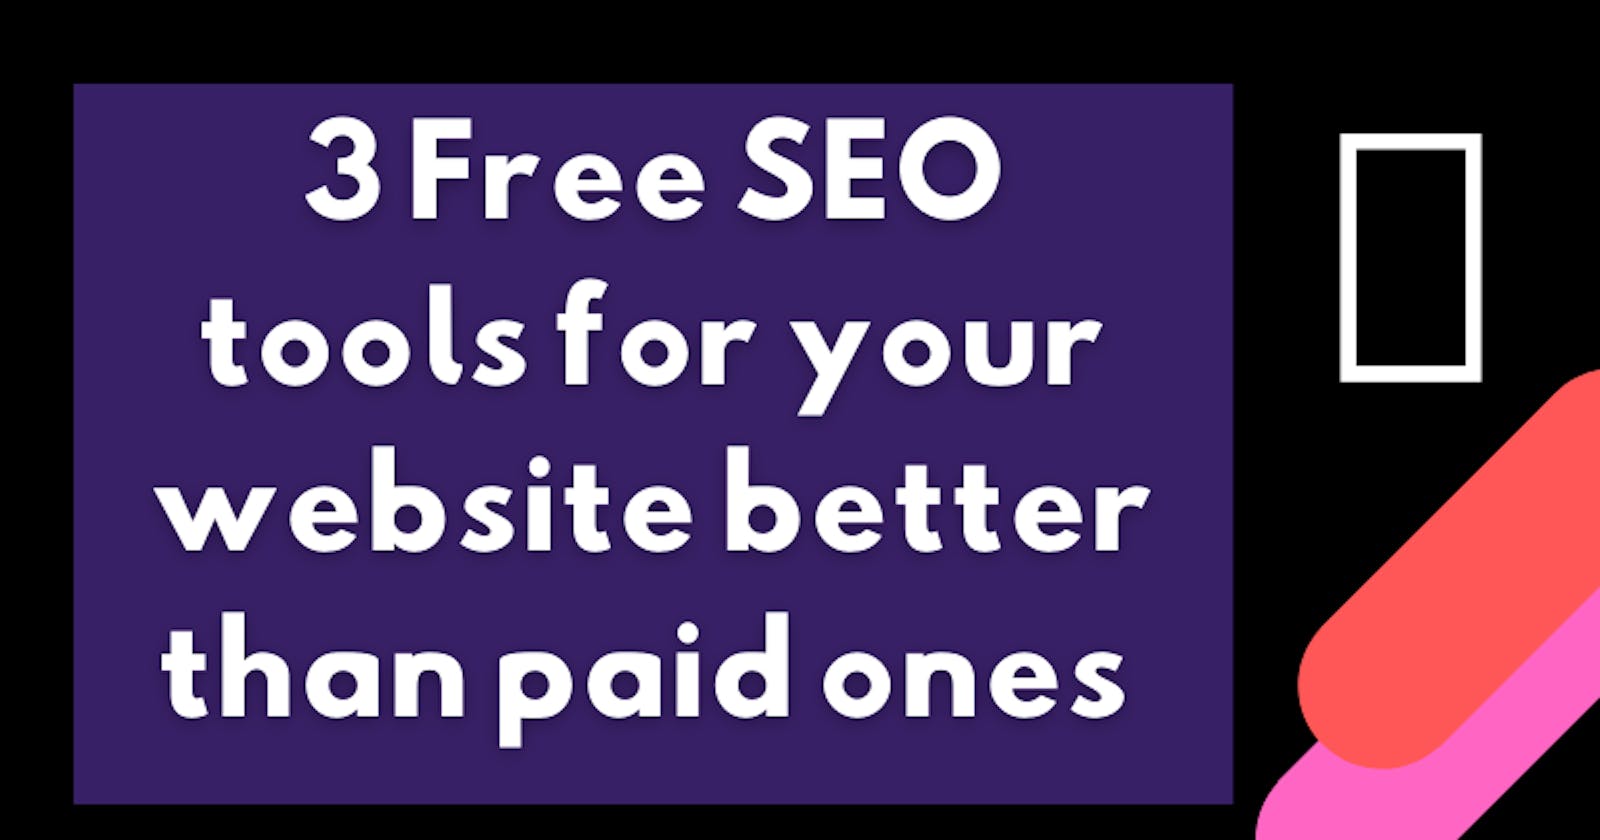 3 Free SEO tools for your website better than paid ones 🤘